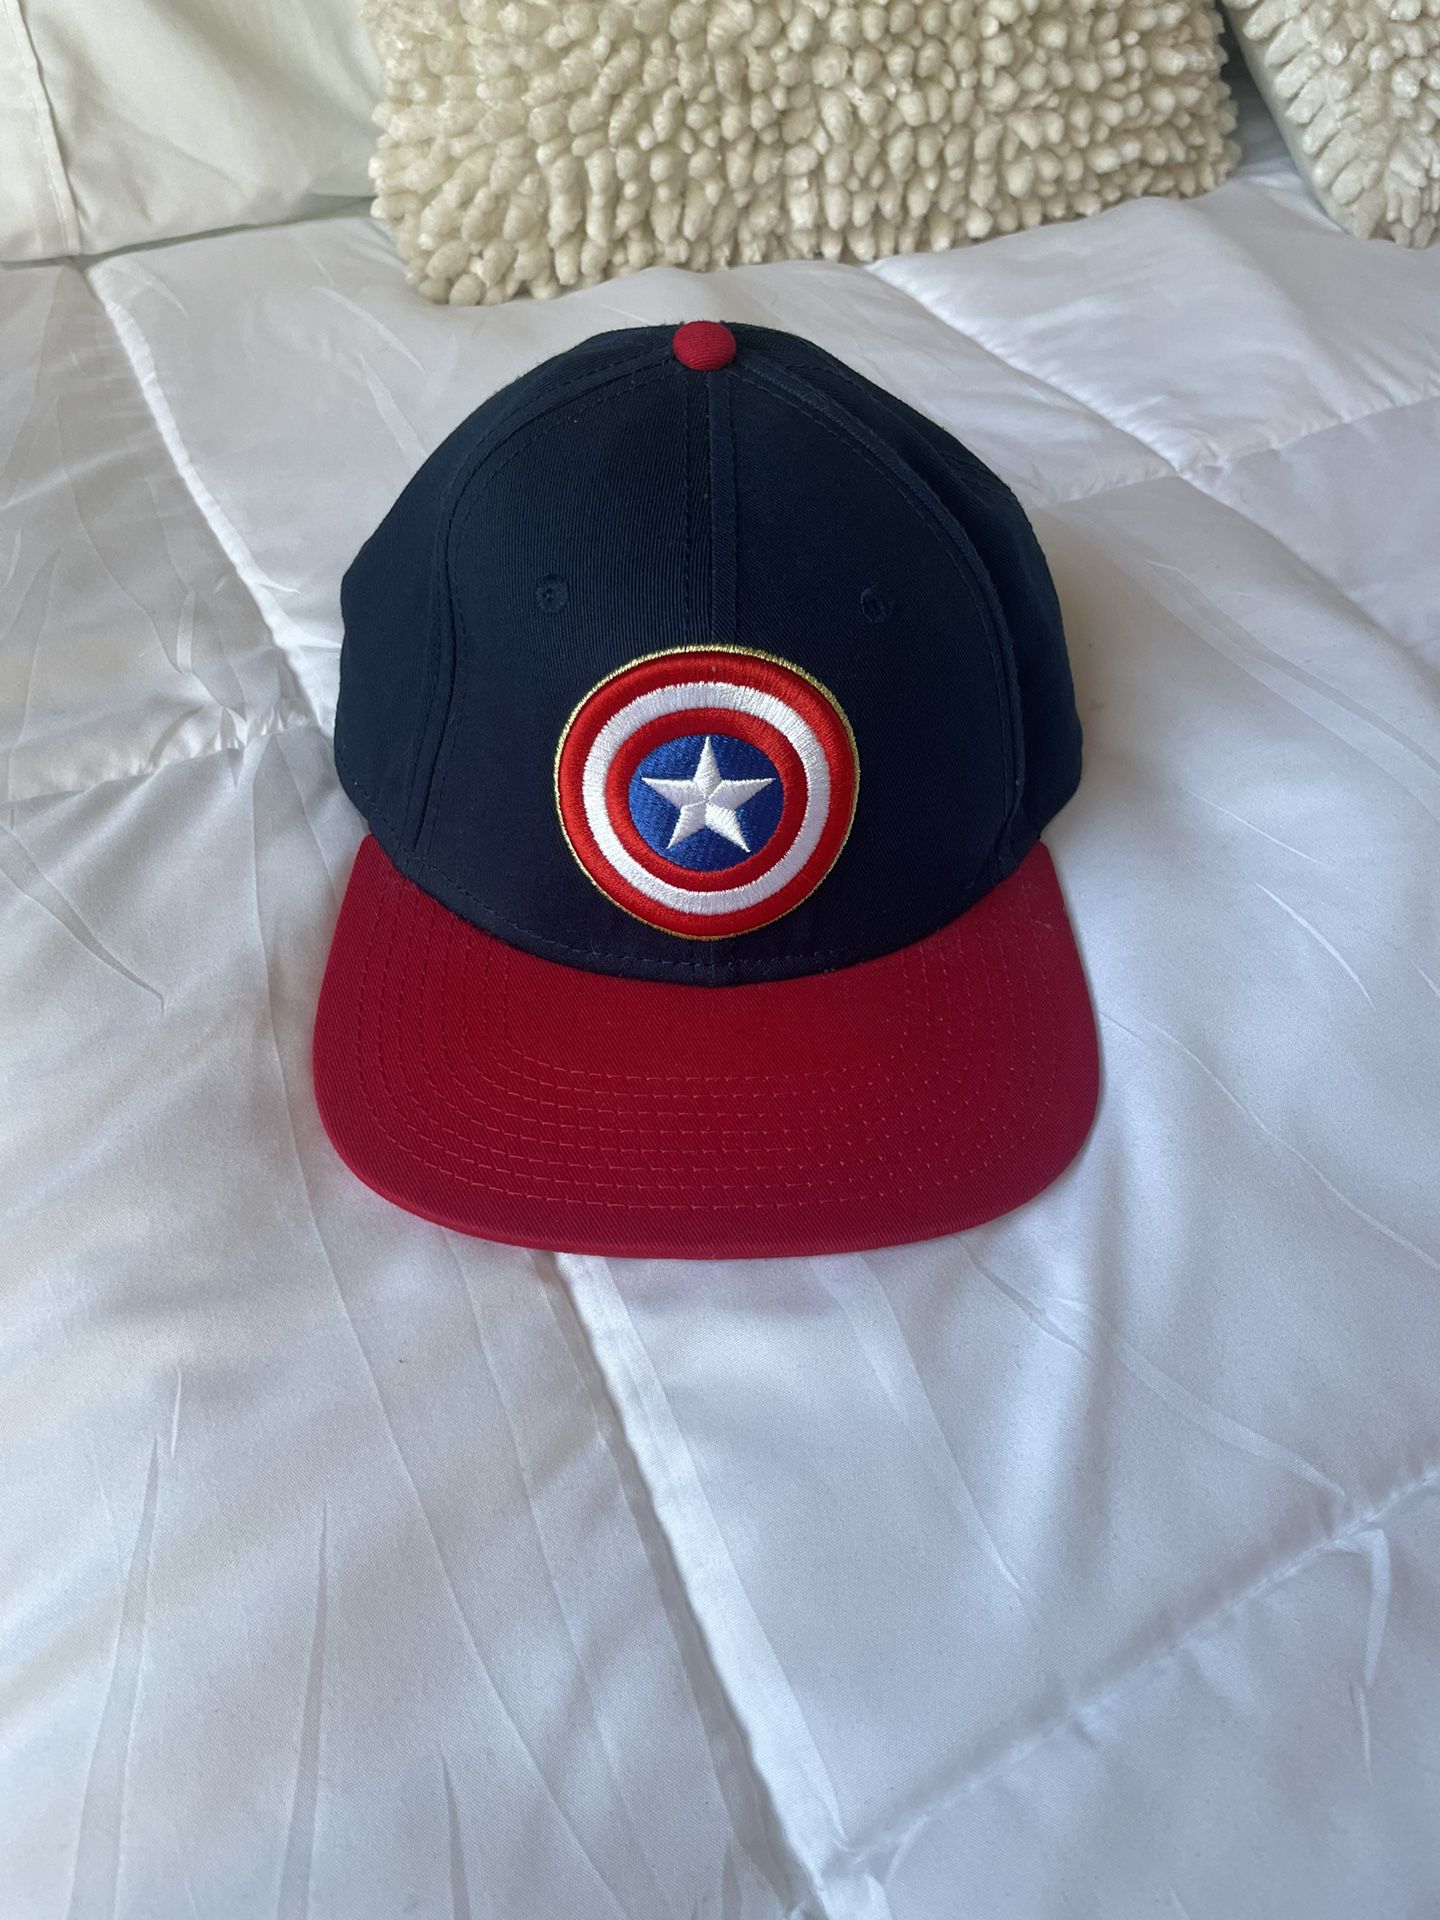 Captain America Hat: New/Never Used